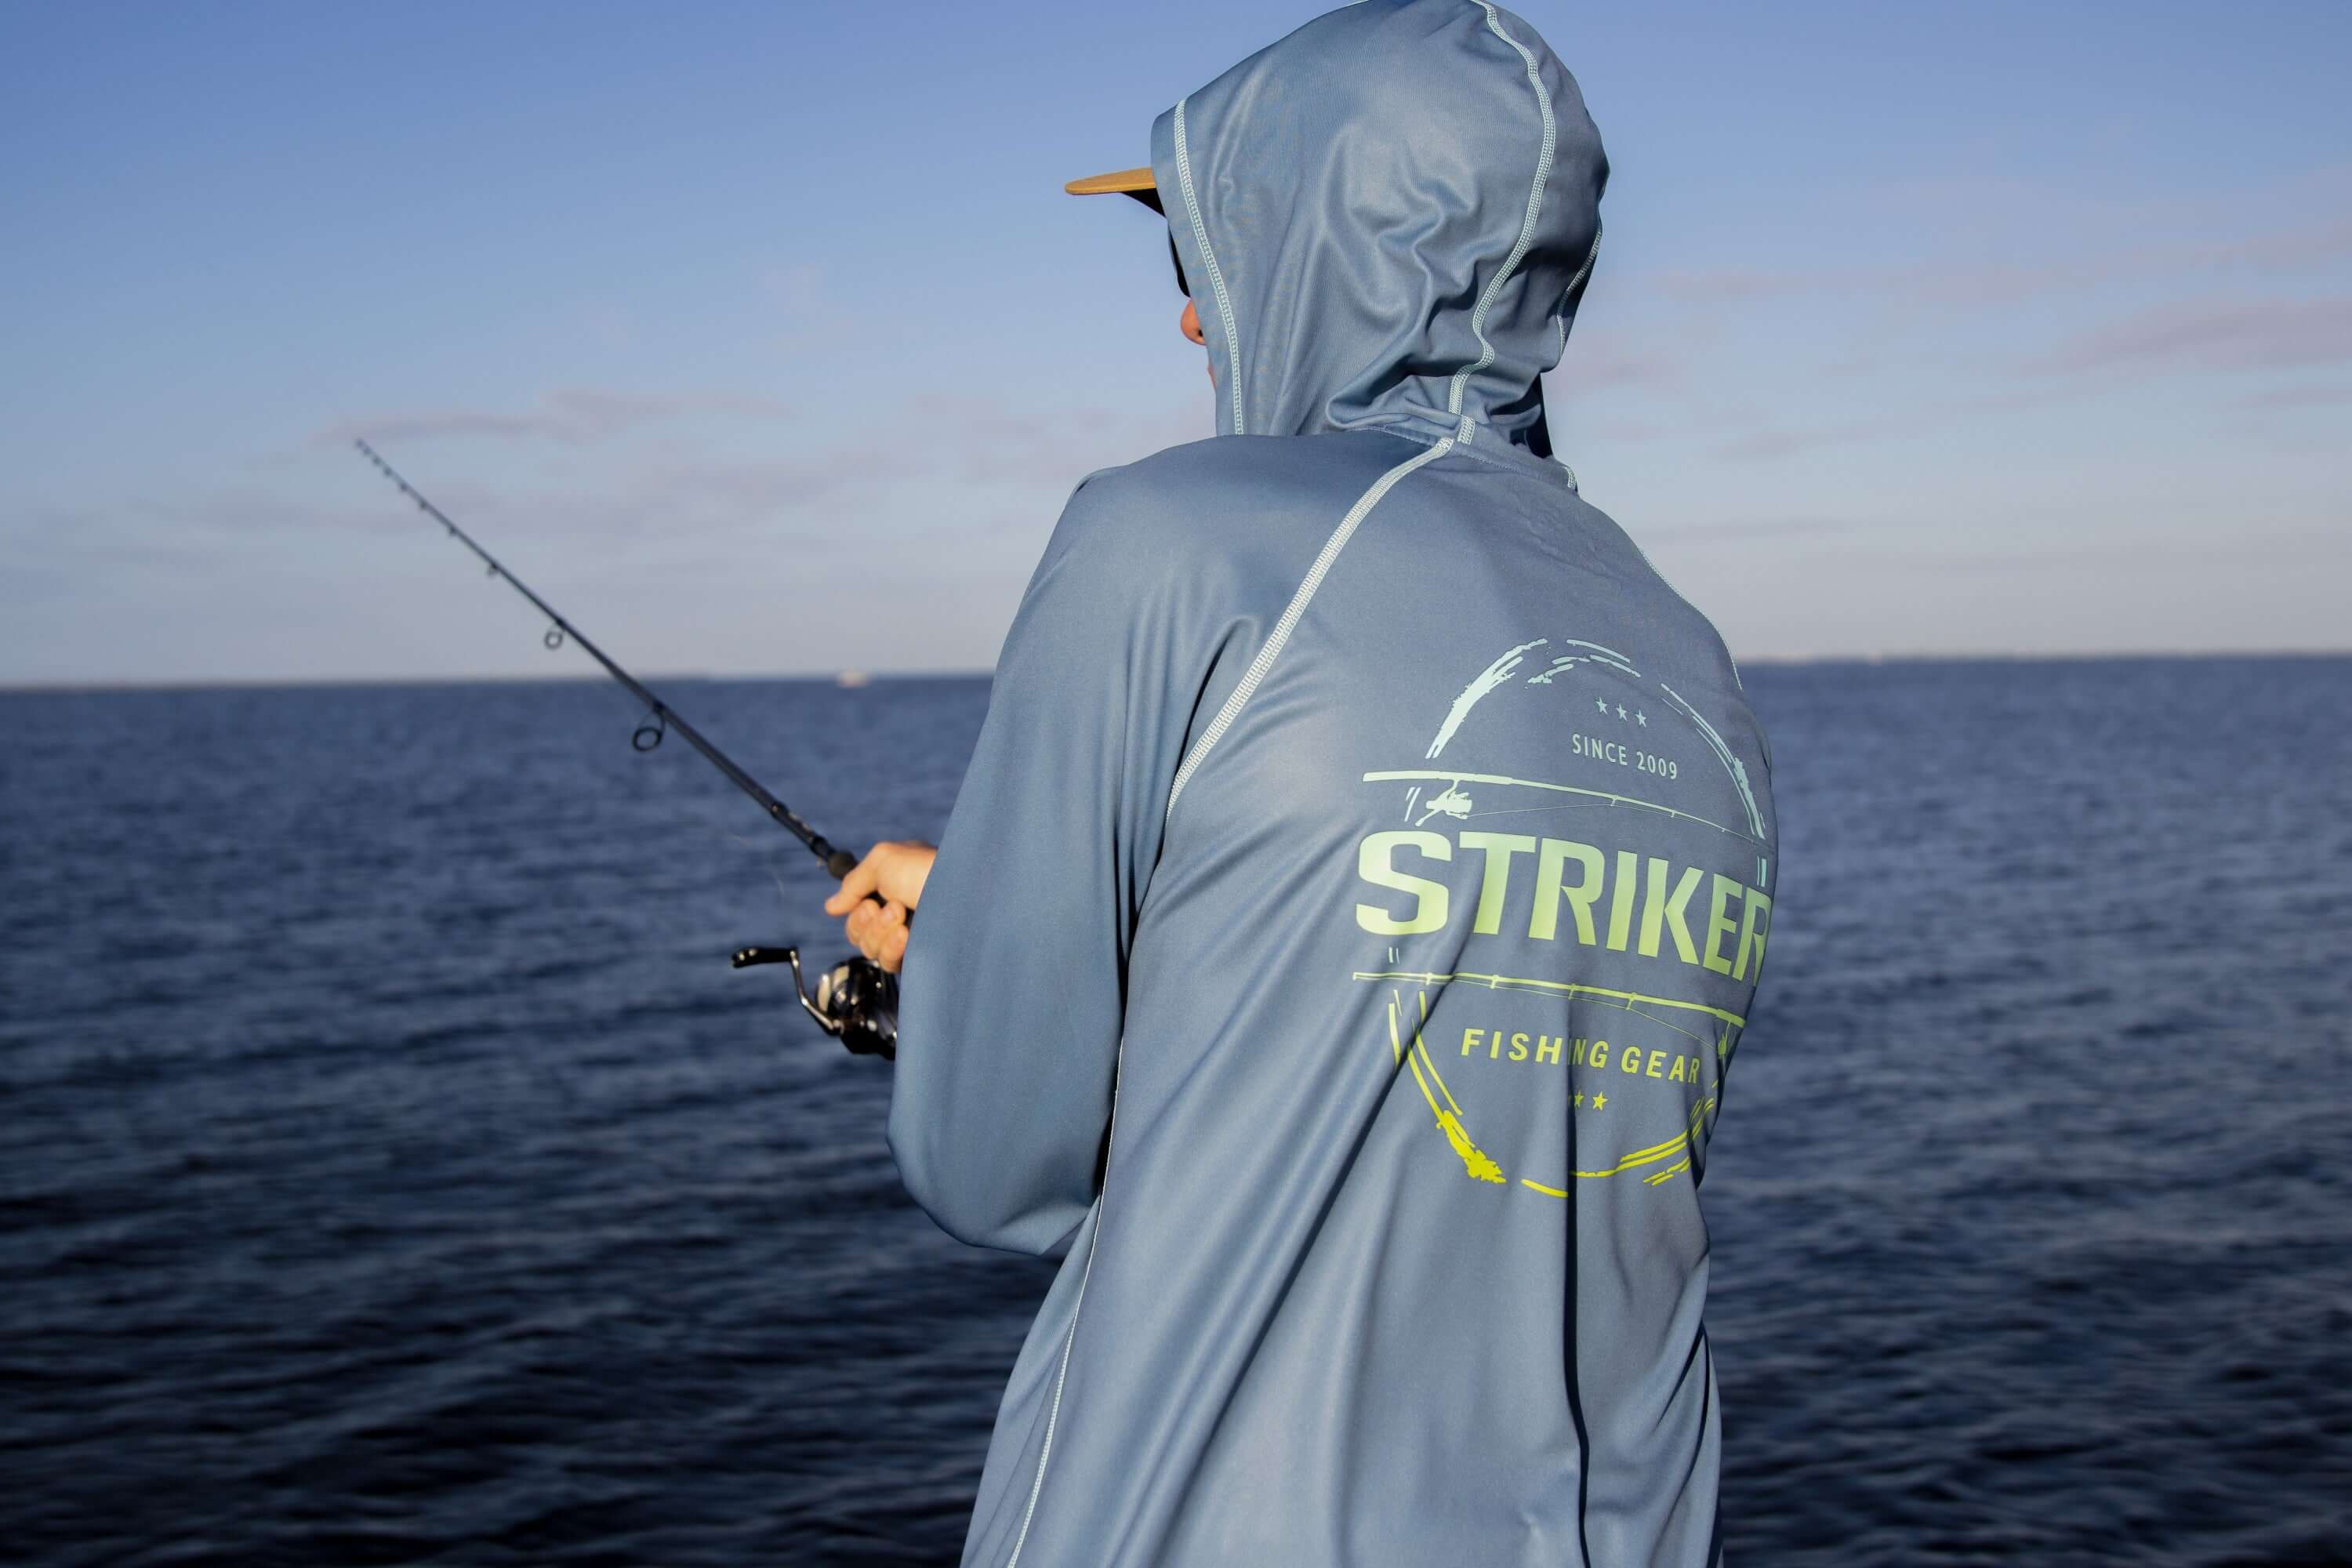 womens fly fishing clothing - Google Search